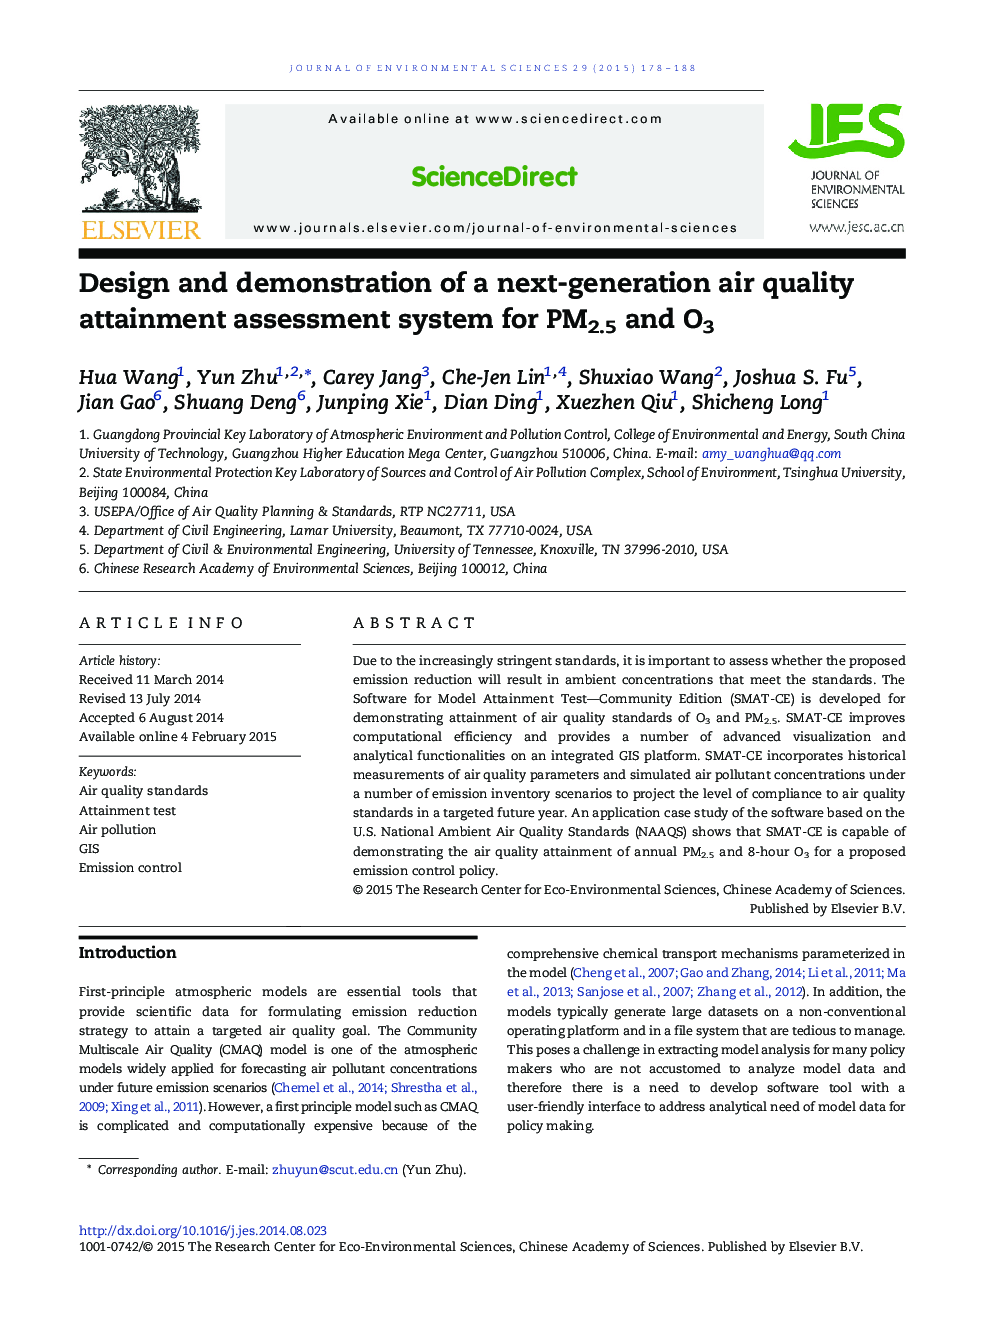 Design and demonstration of a next-generation air quality attainment assessment system for PM2.5 and O3